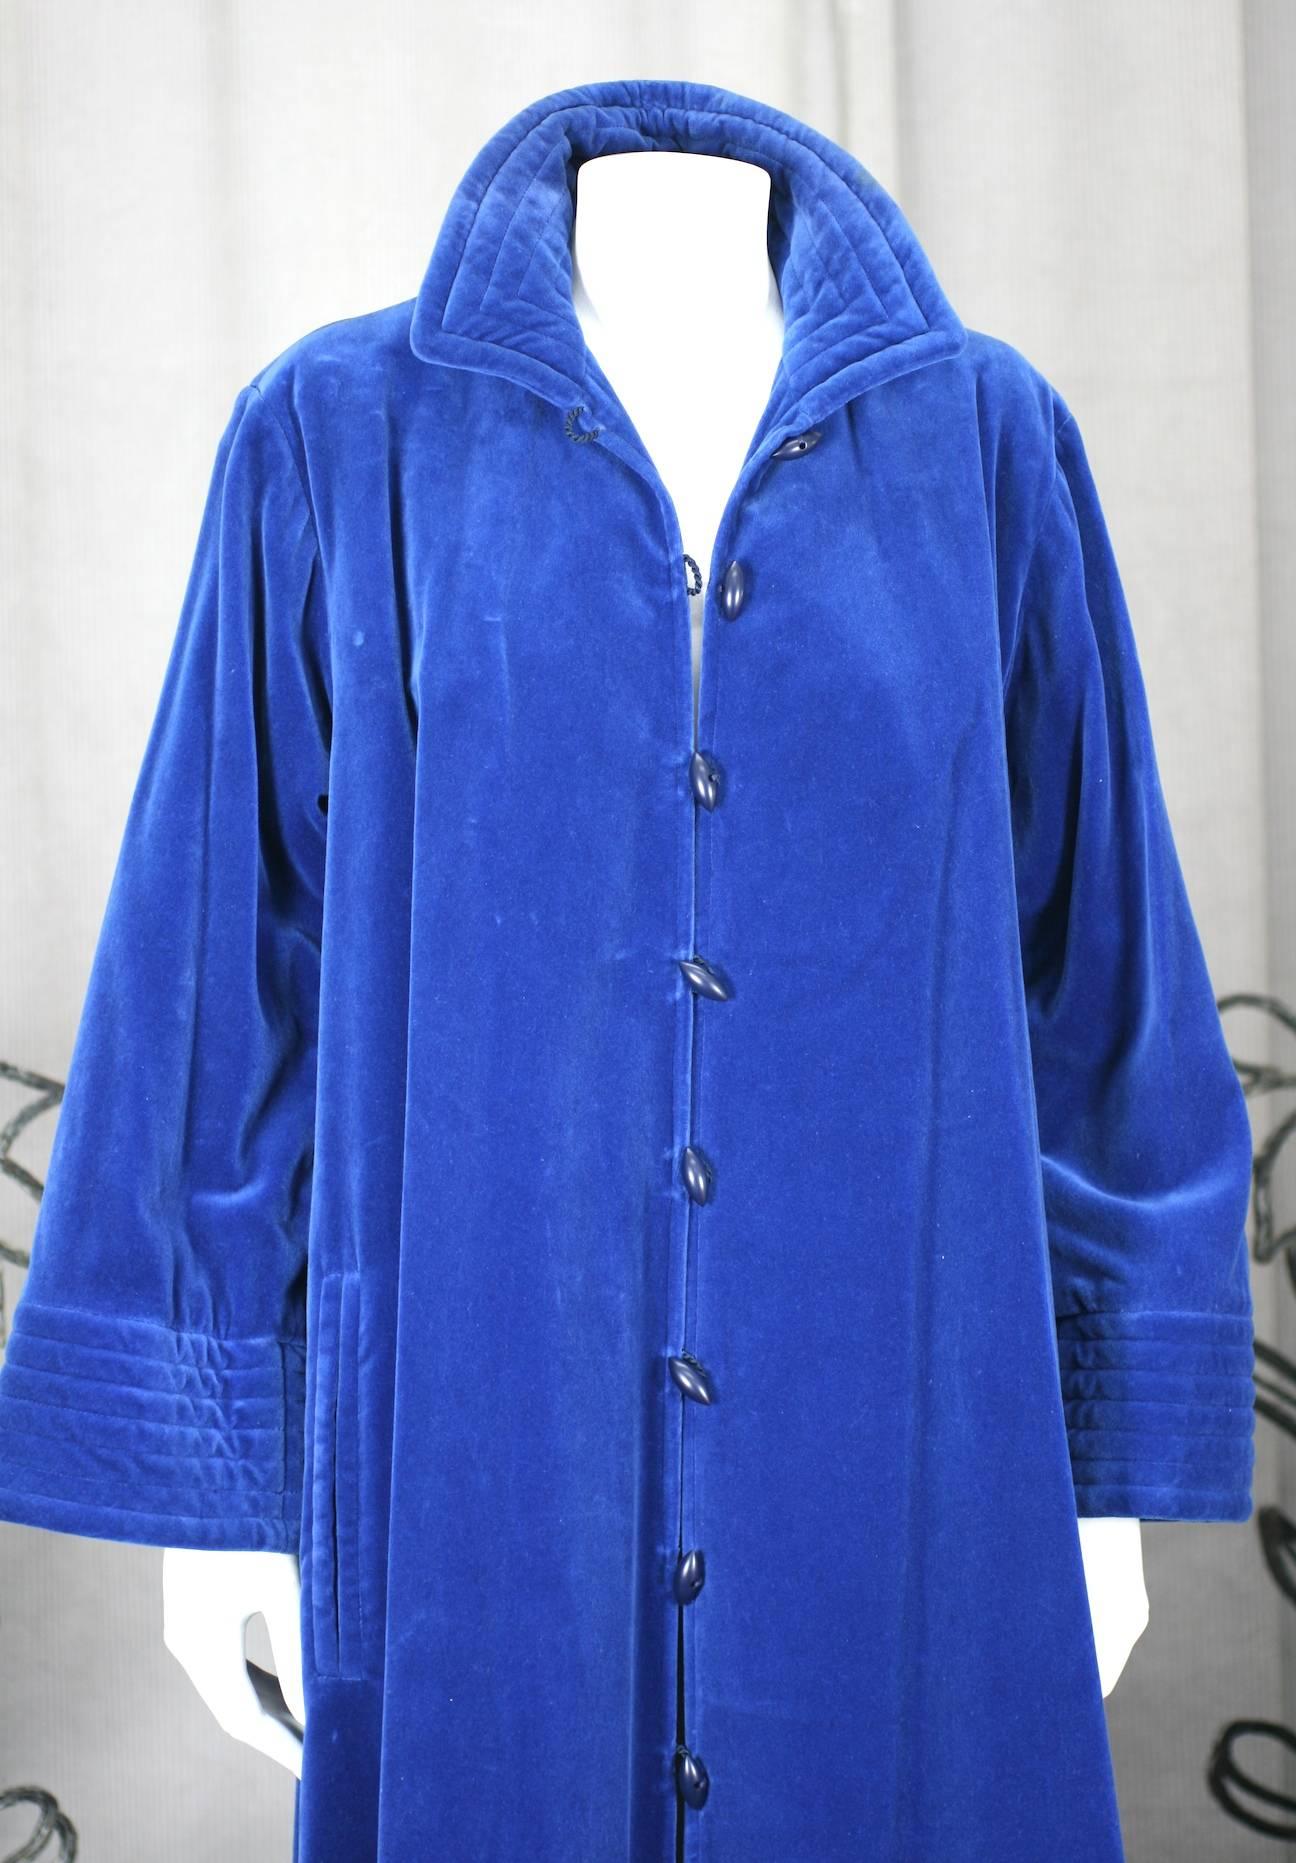 Yves Saint Laurent Rive Gauche corn flower blue cotton velvet long, flared coat. Chinese inspired trapunto stitching with quilted collar and cuffs. Slash pockets and unusual toggle fasteners shaped like small pods. 1980's .France Excellent